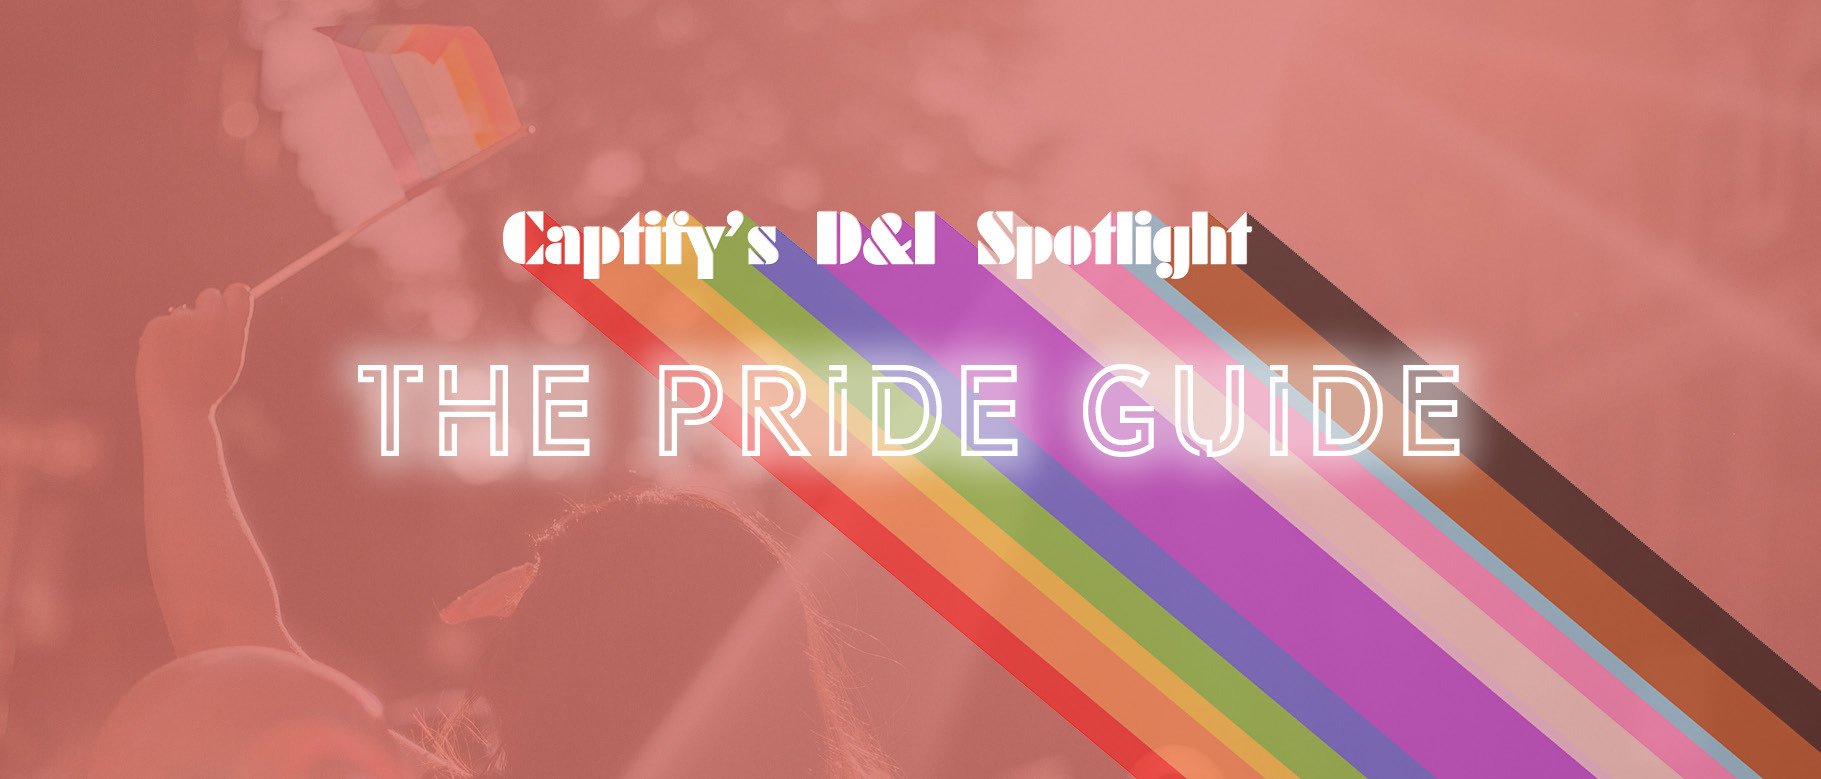 How To Celebrate and Support Pride Globally and Virtually